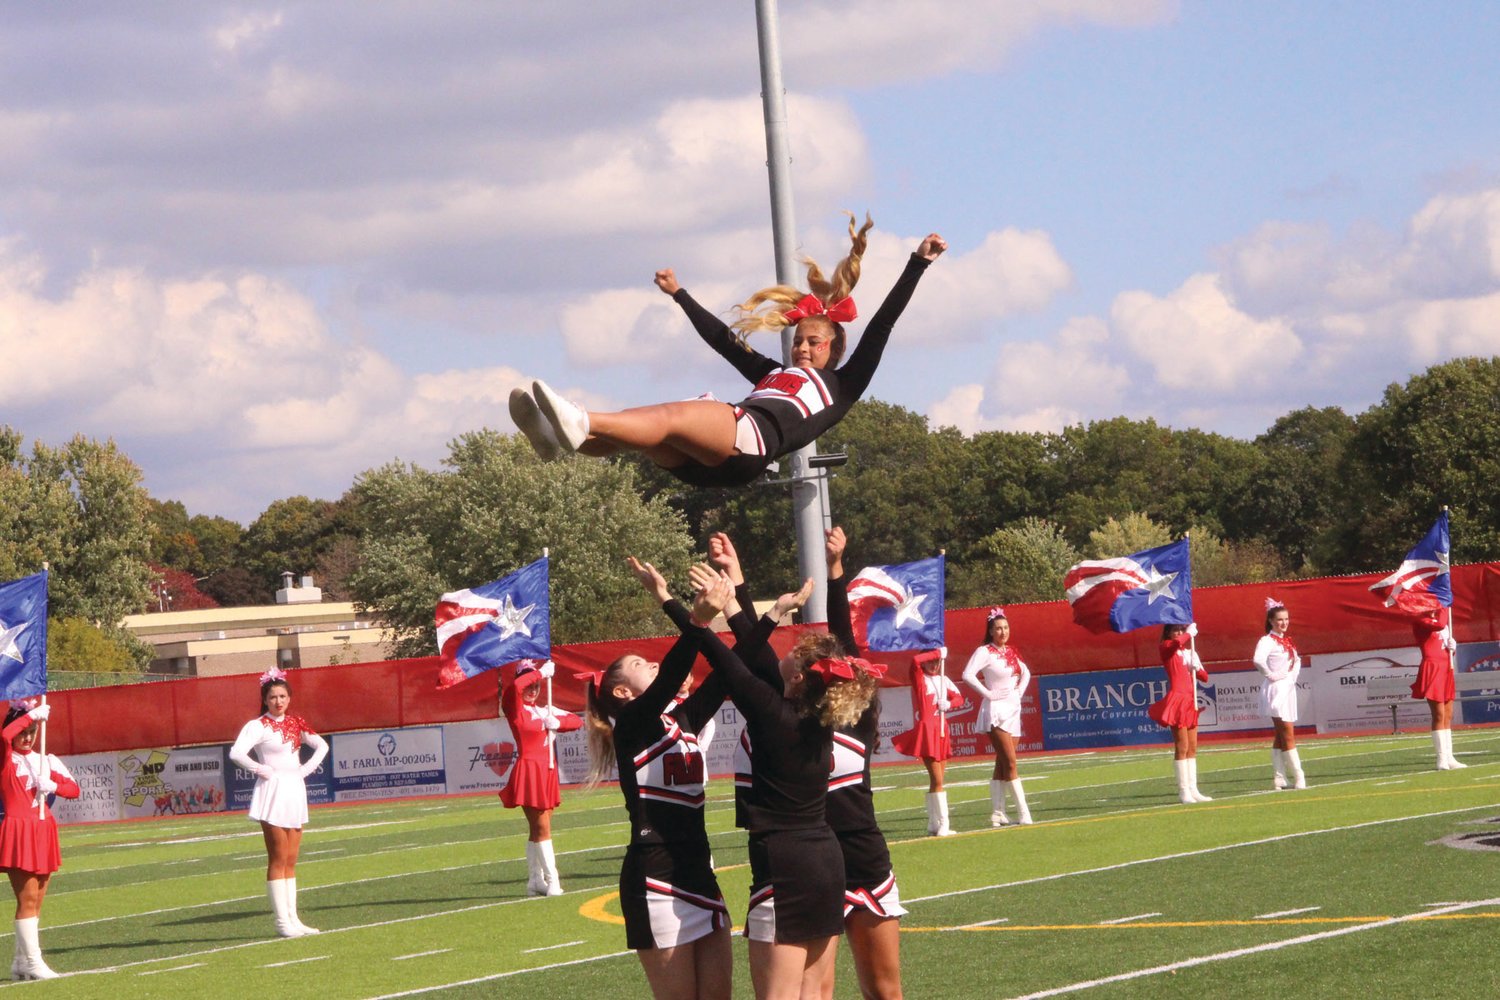 FLYING HIGH: The Cranston High School West Falconettes, Westernettes and cheerleaders entertain the crowd during the school’s Oct. 22 homecoming.